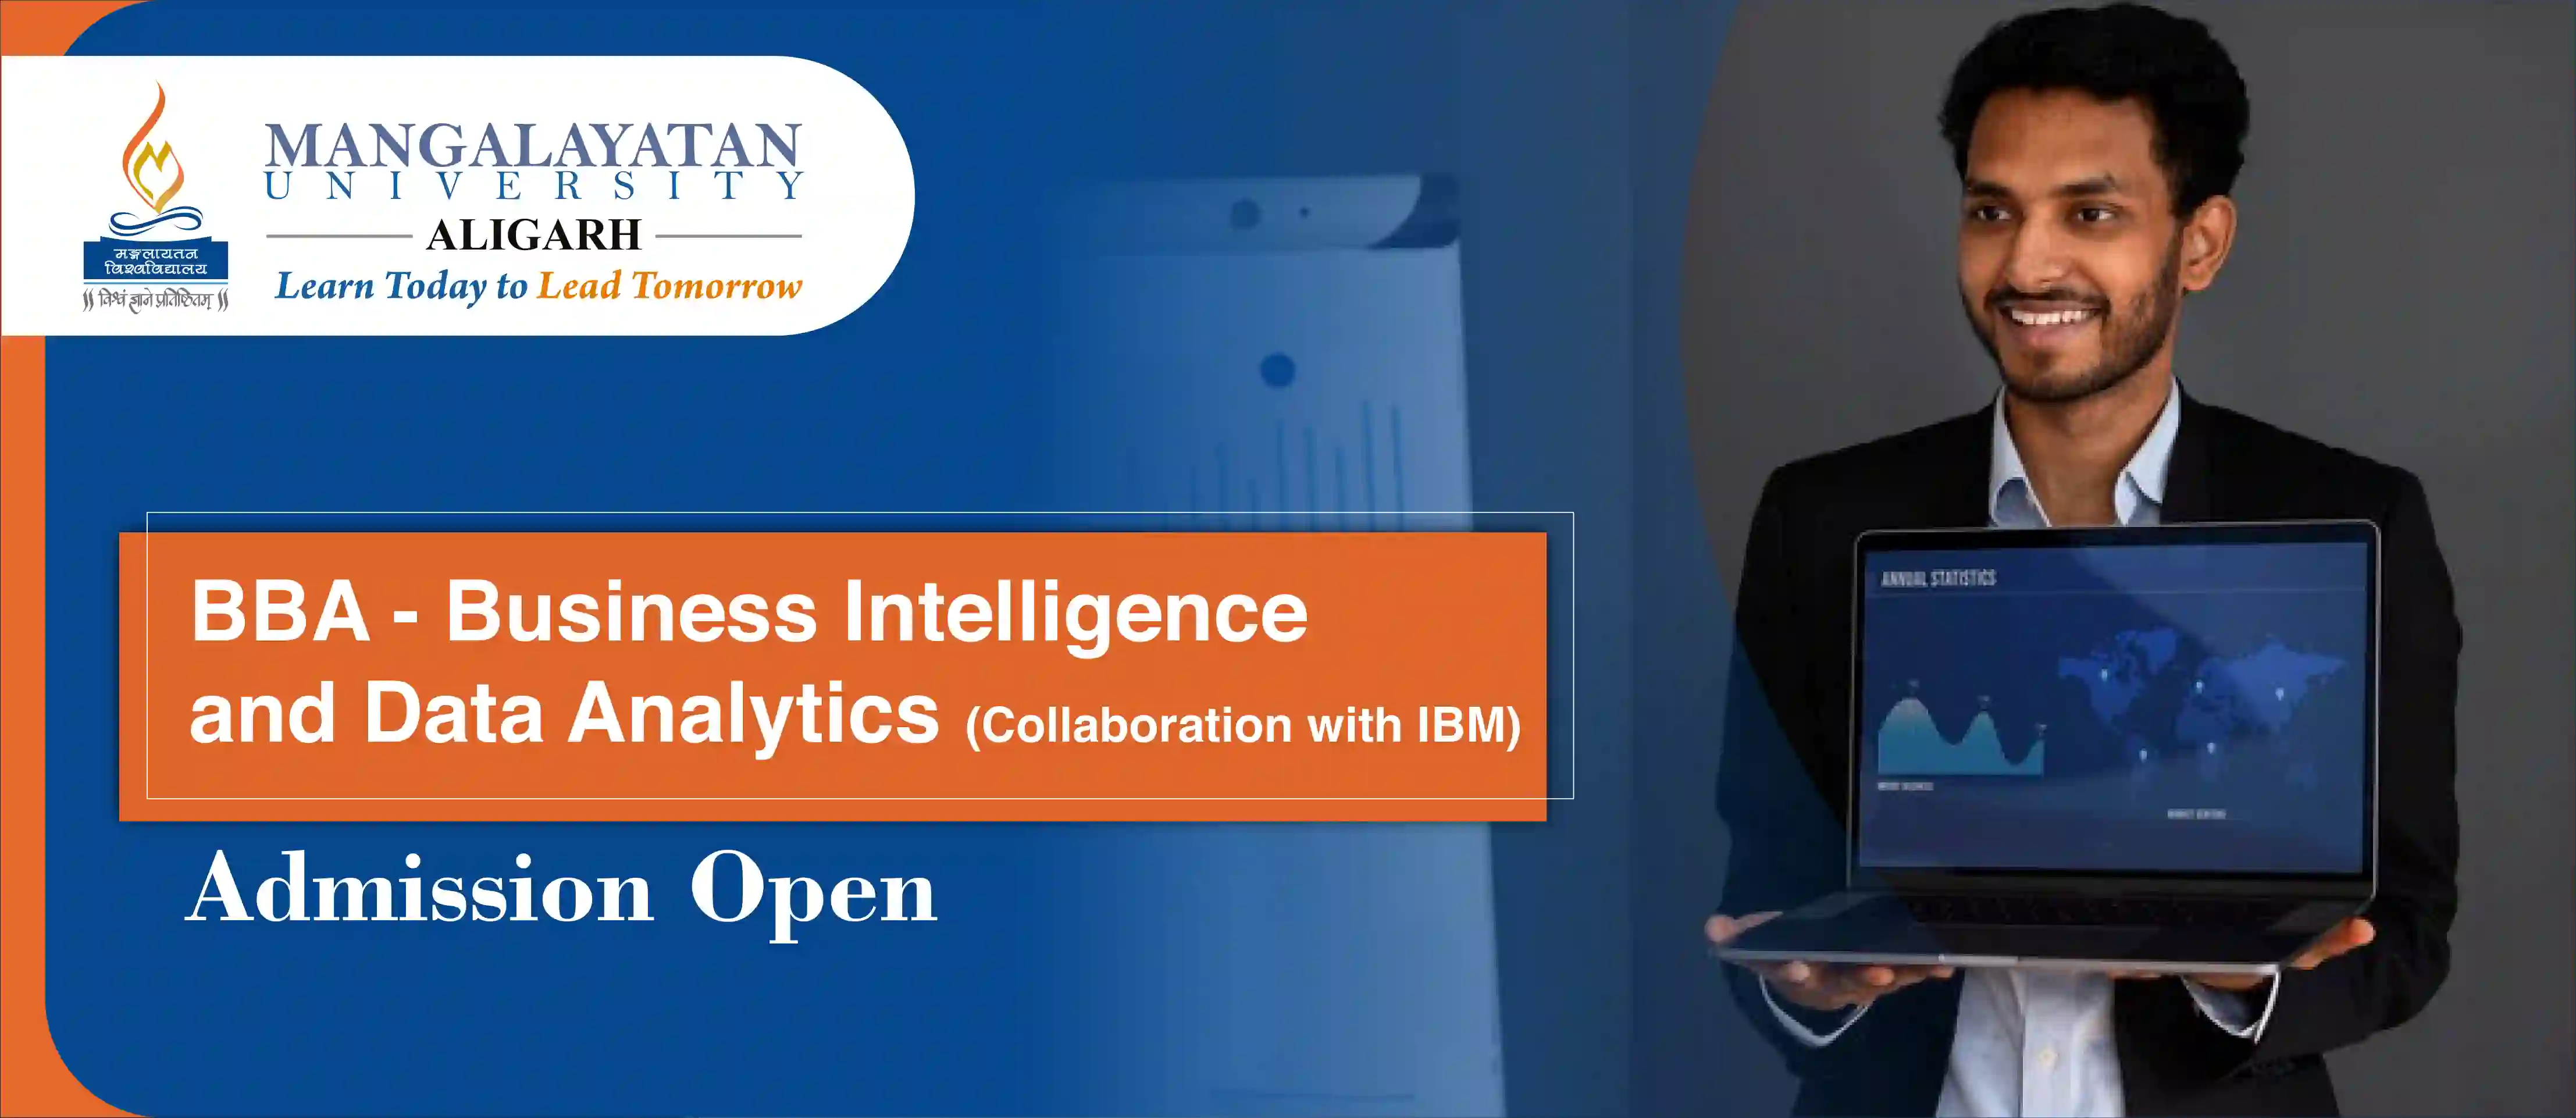 BBA - Business Intelligence and Data Analytics (Collaboration with IBM) Admission